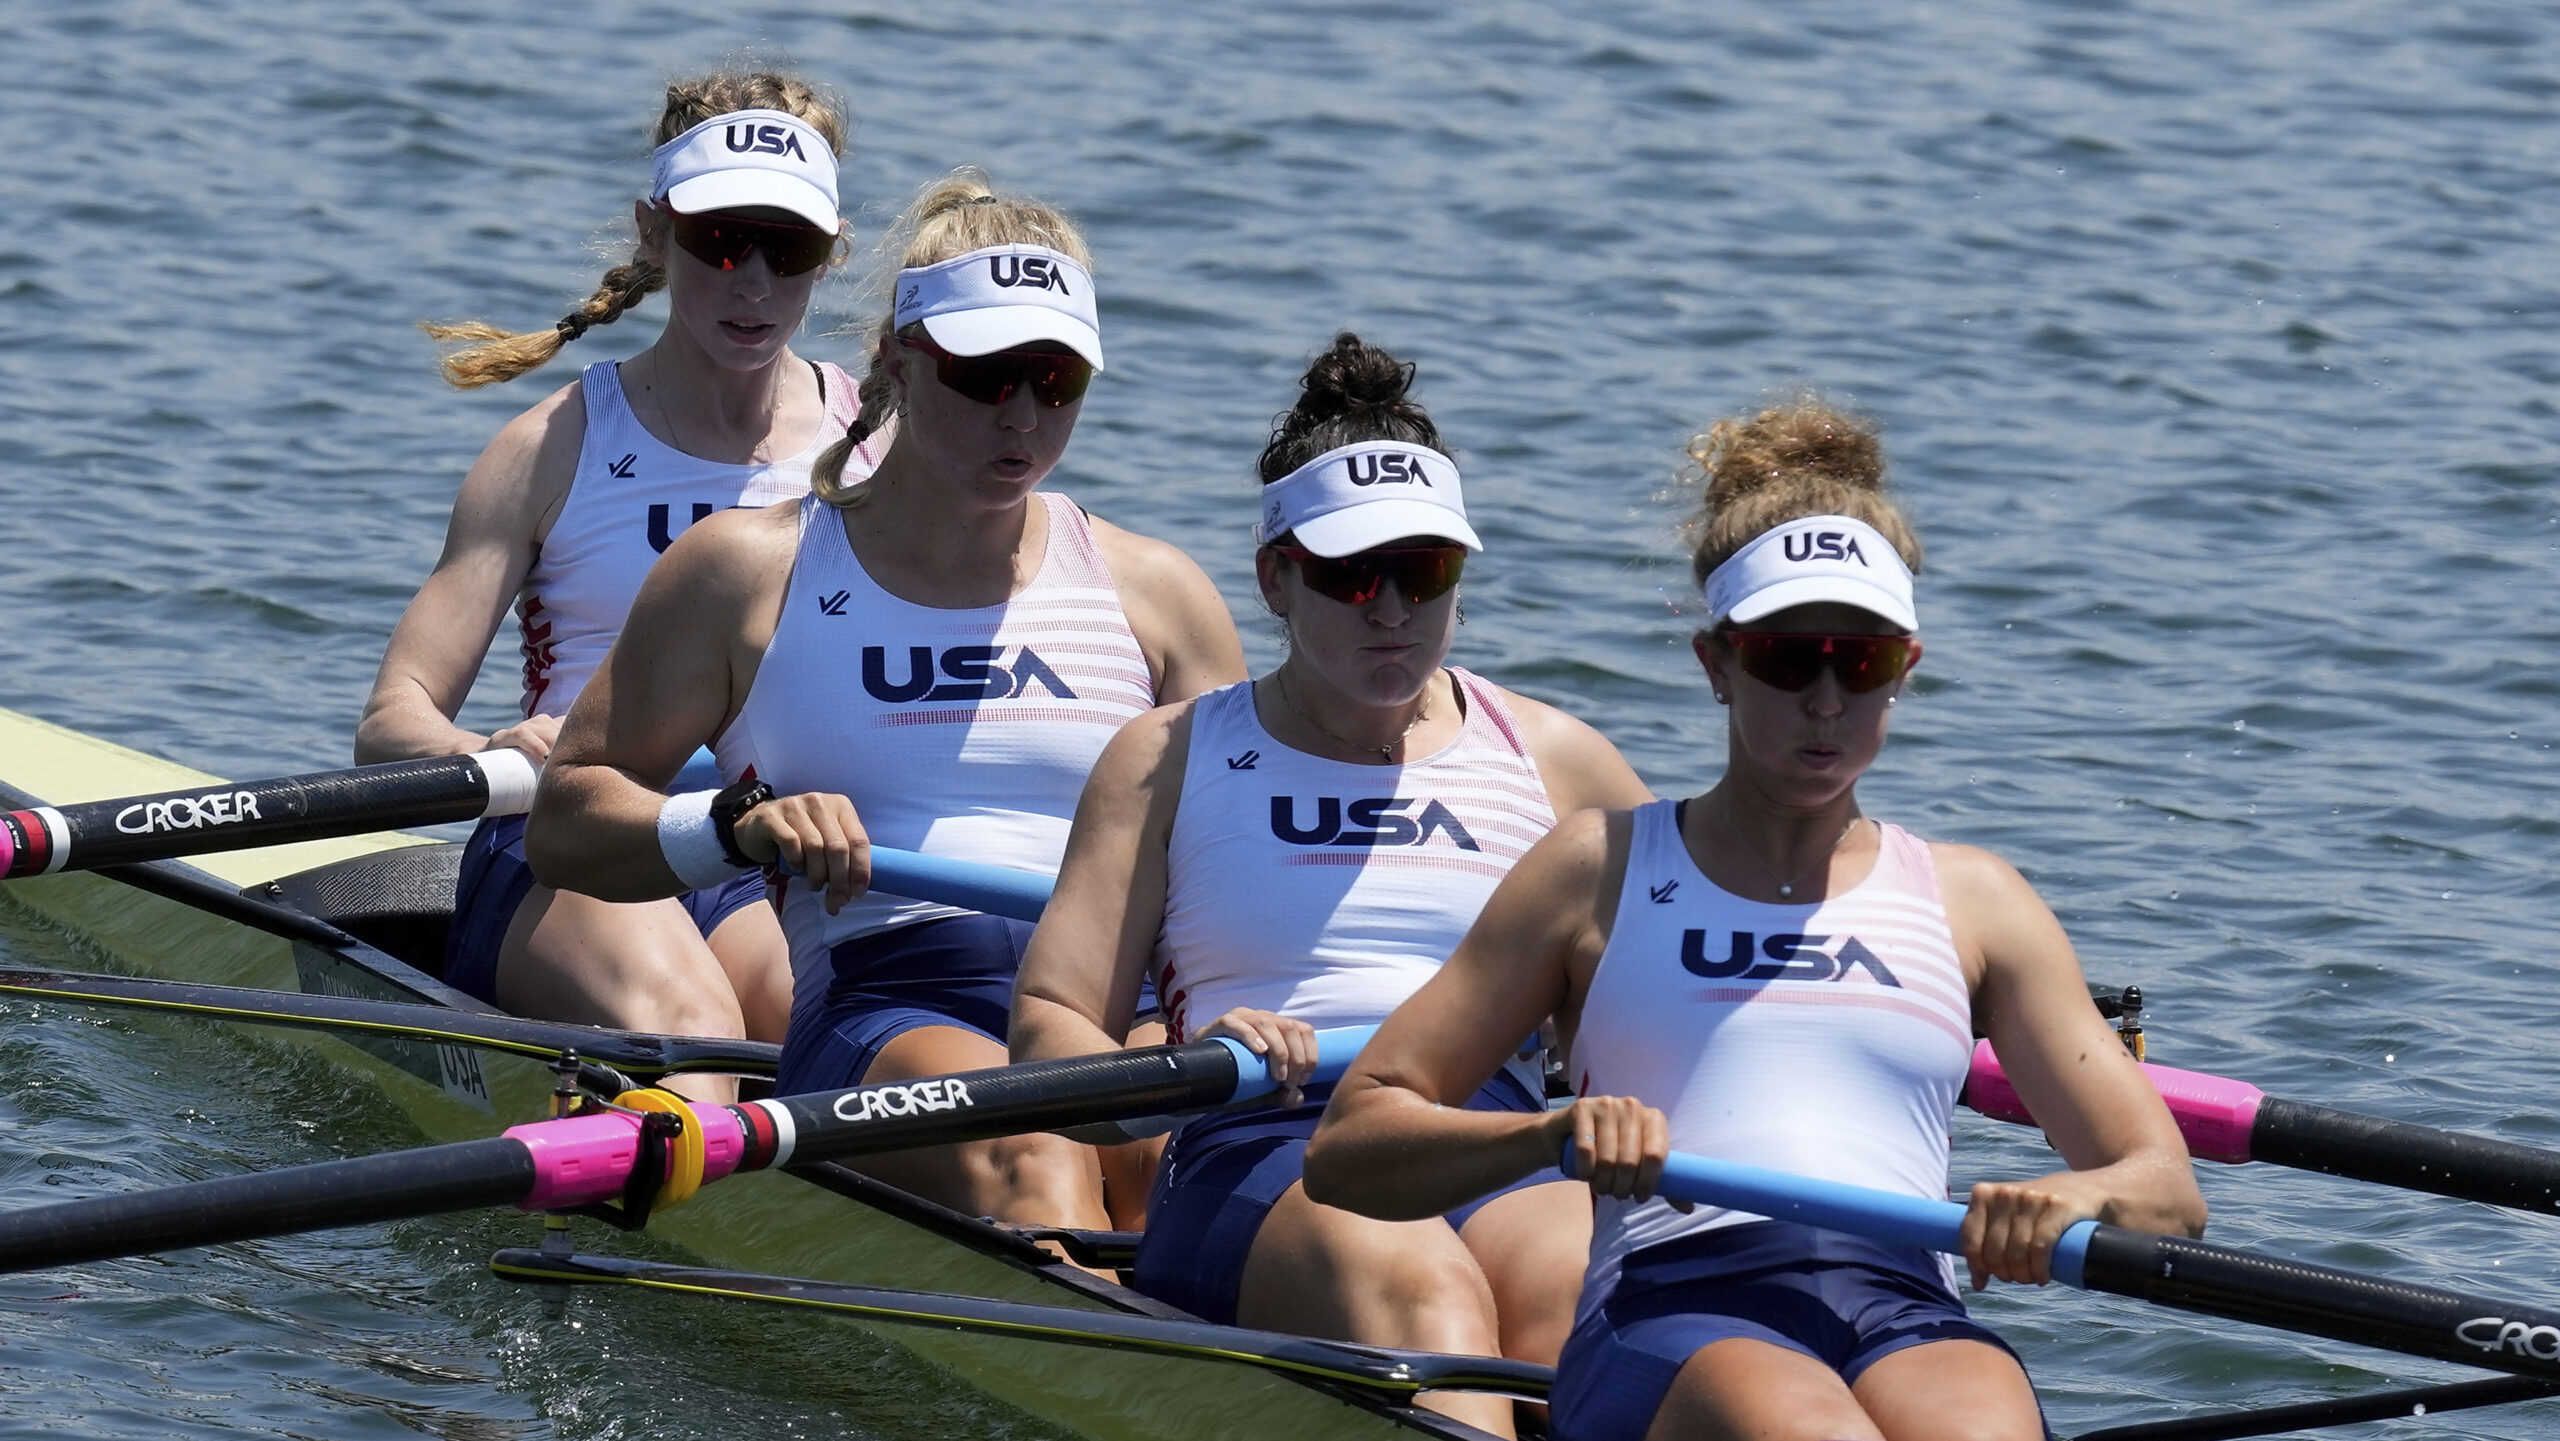 For women row together in a slim rowing boat. They're wearing matching uniforms that read "USA."